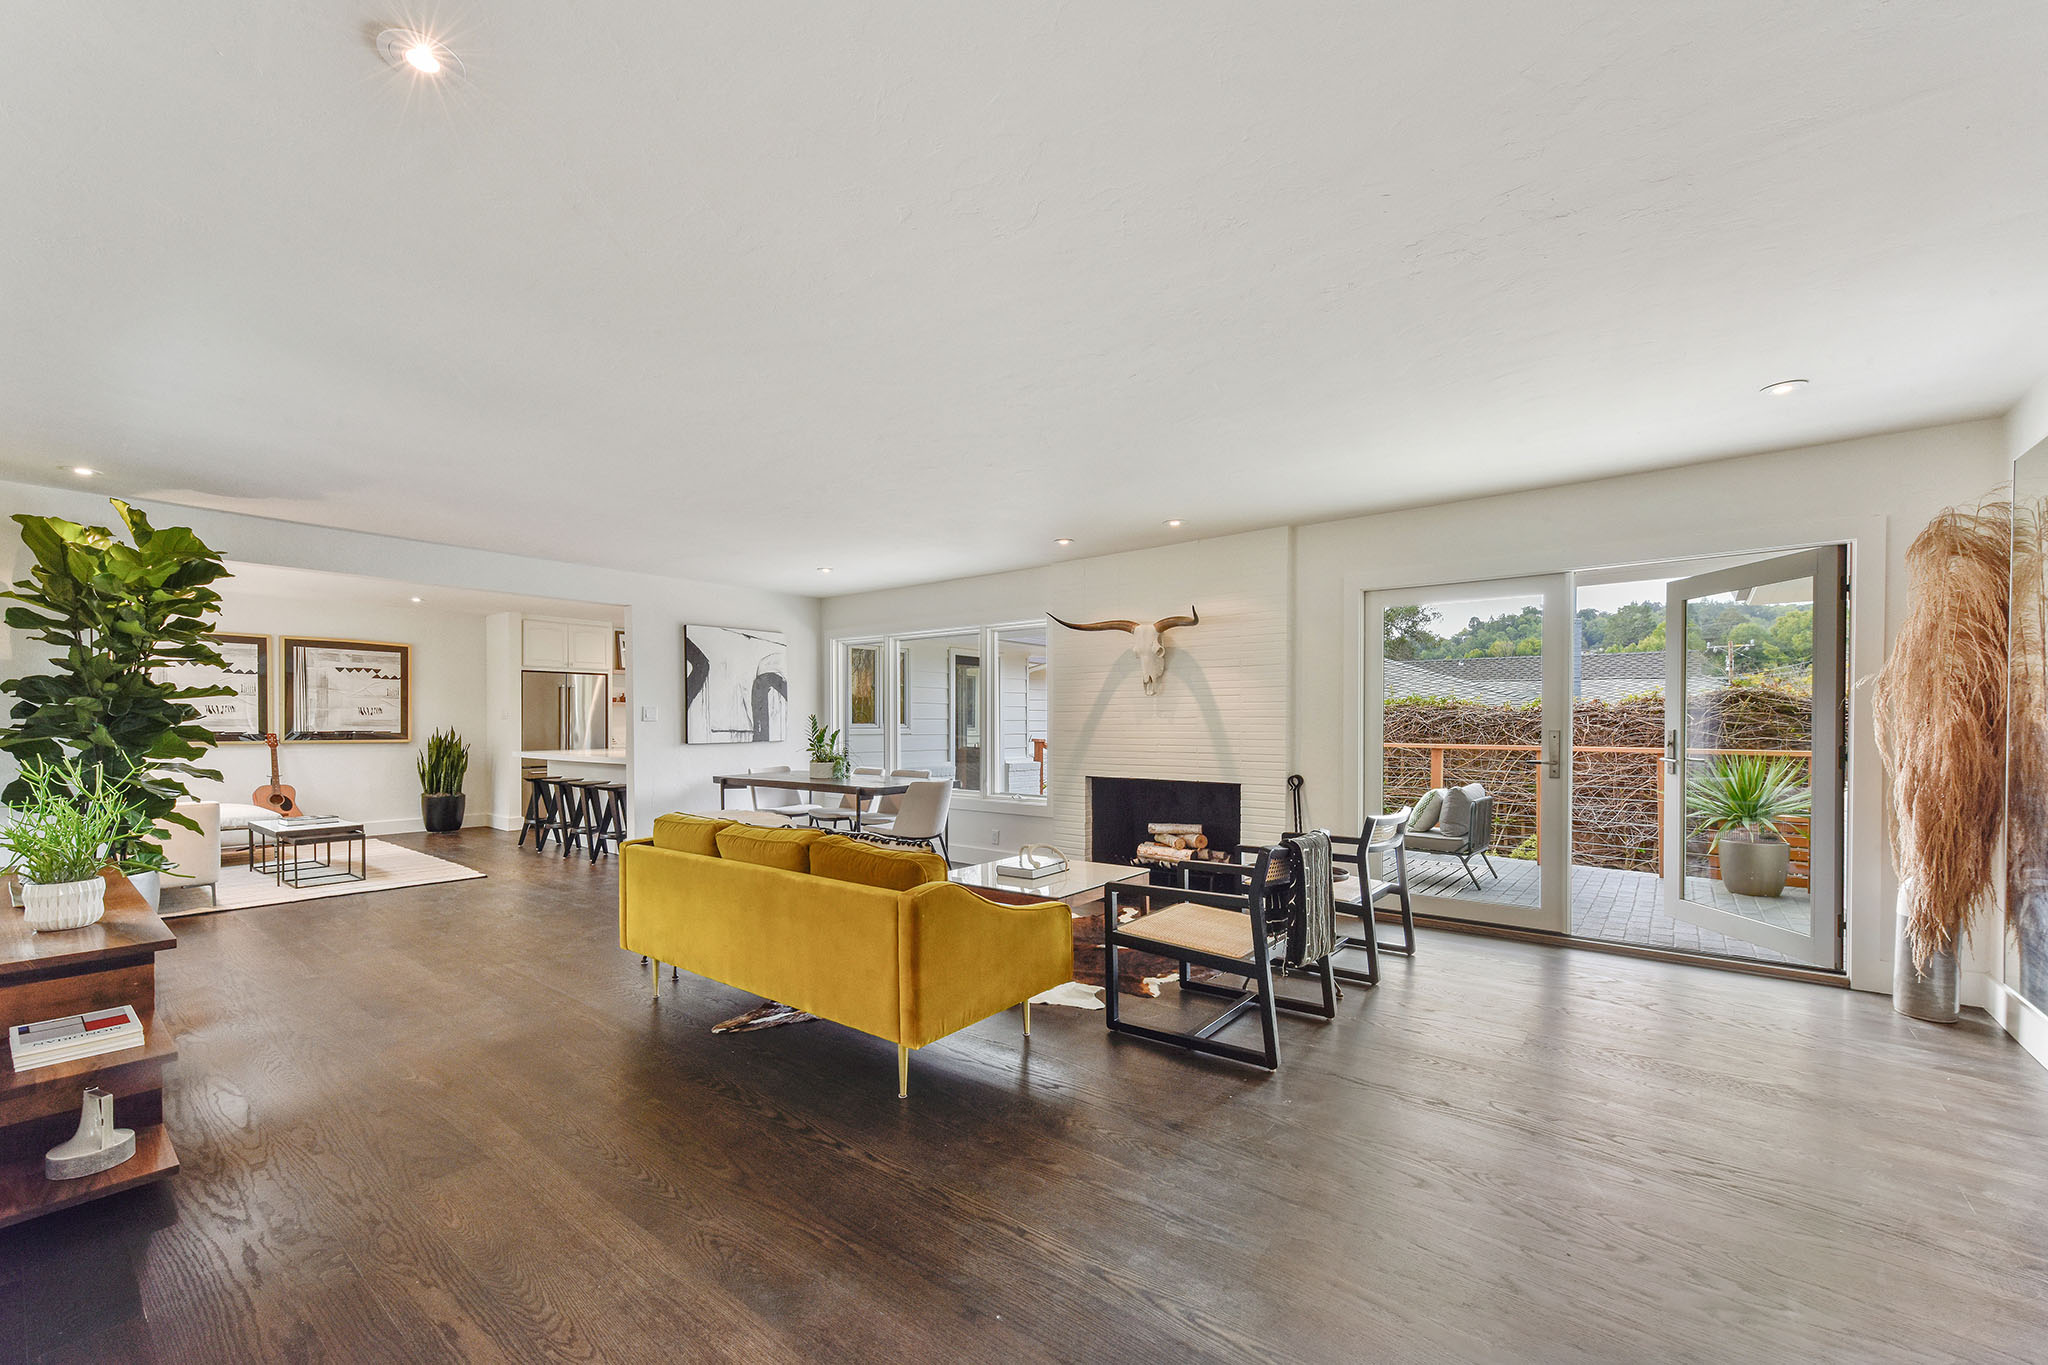 Open floor plan view of the primary living spaces featuring wood floors and a fireplace